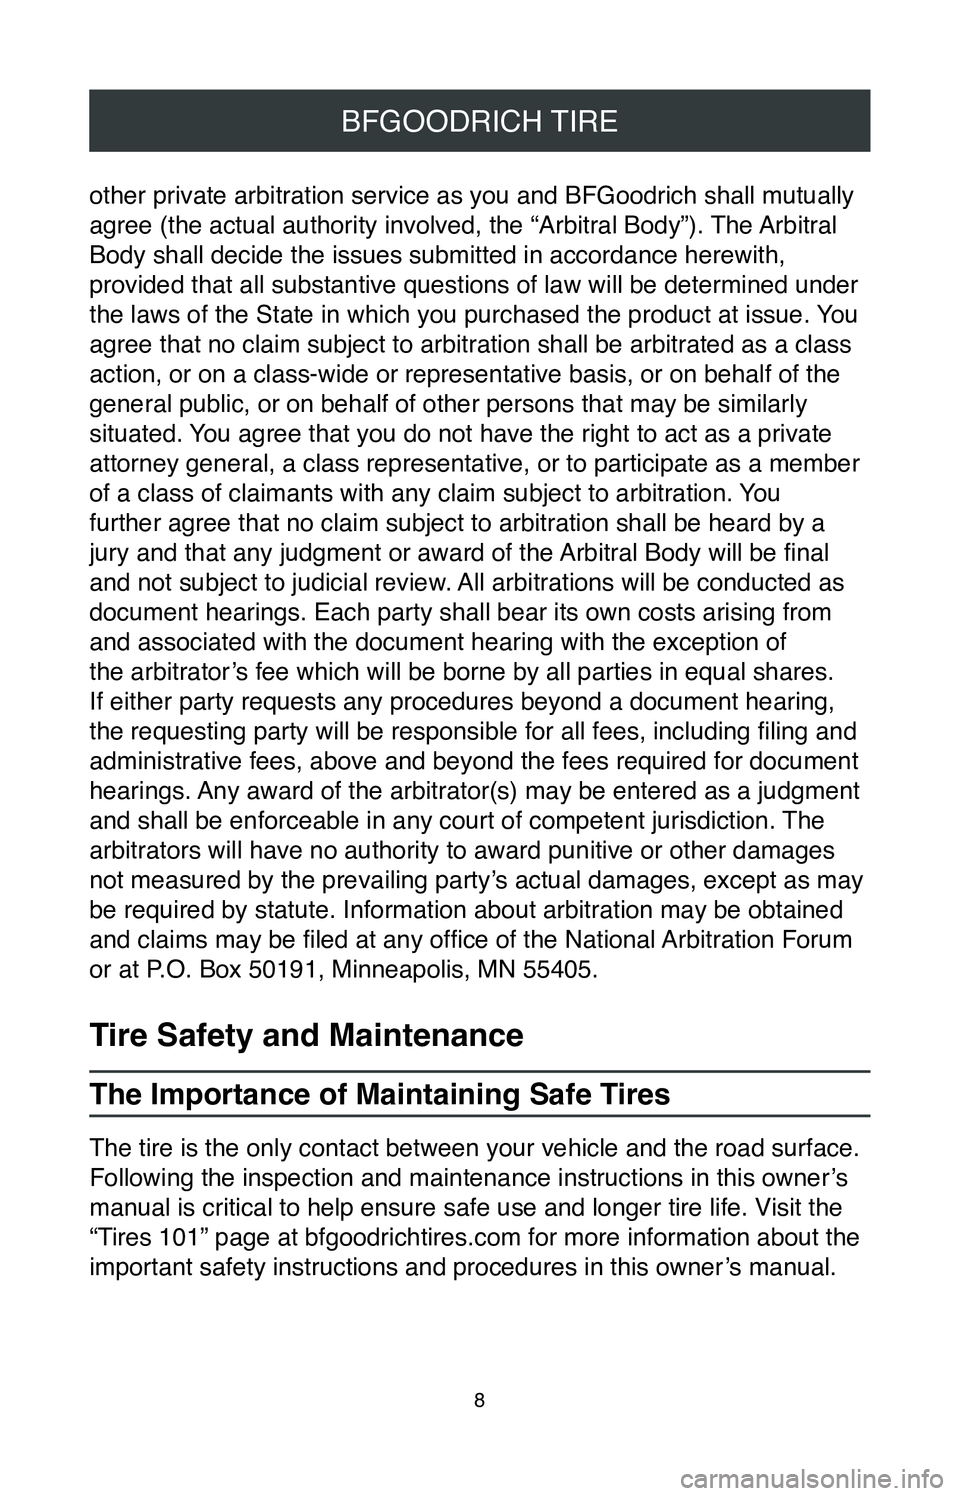 TOYOTA SUPRA 2020  Warranties & Maintenance Guides (in English) 8
BFGOODRICH TIRE
other private arbitration service as you and BFGoodrich shall mutually 
agree (the actual authority involved, the “Arbitral Body”). The Arbitral 
Body shall decide the issues sub